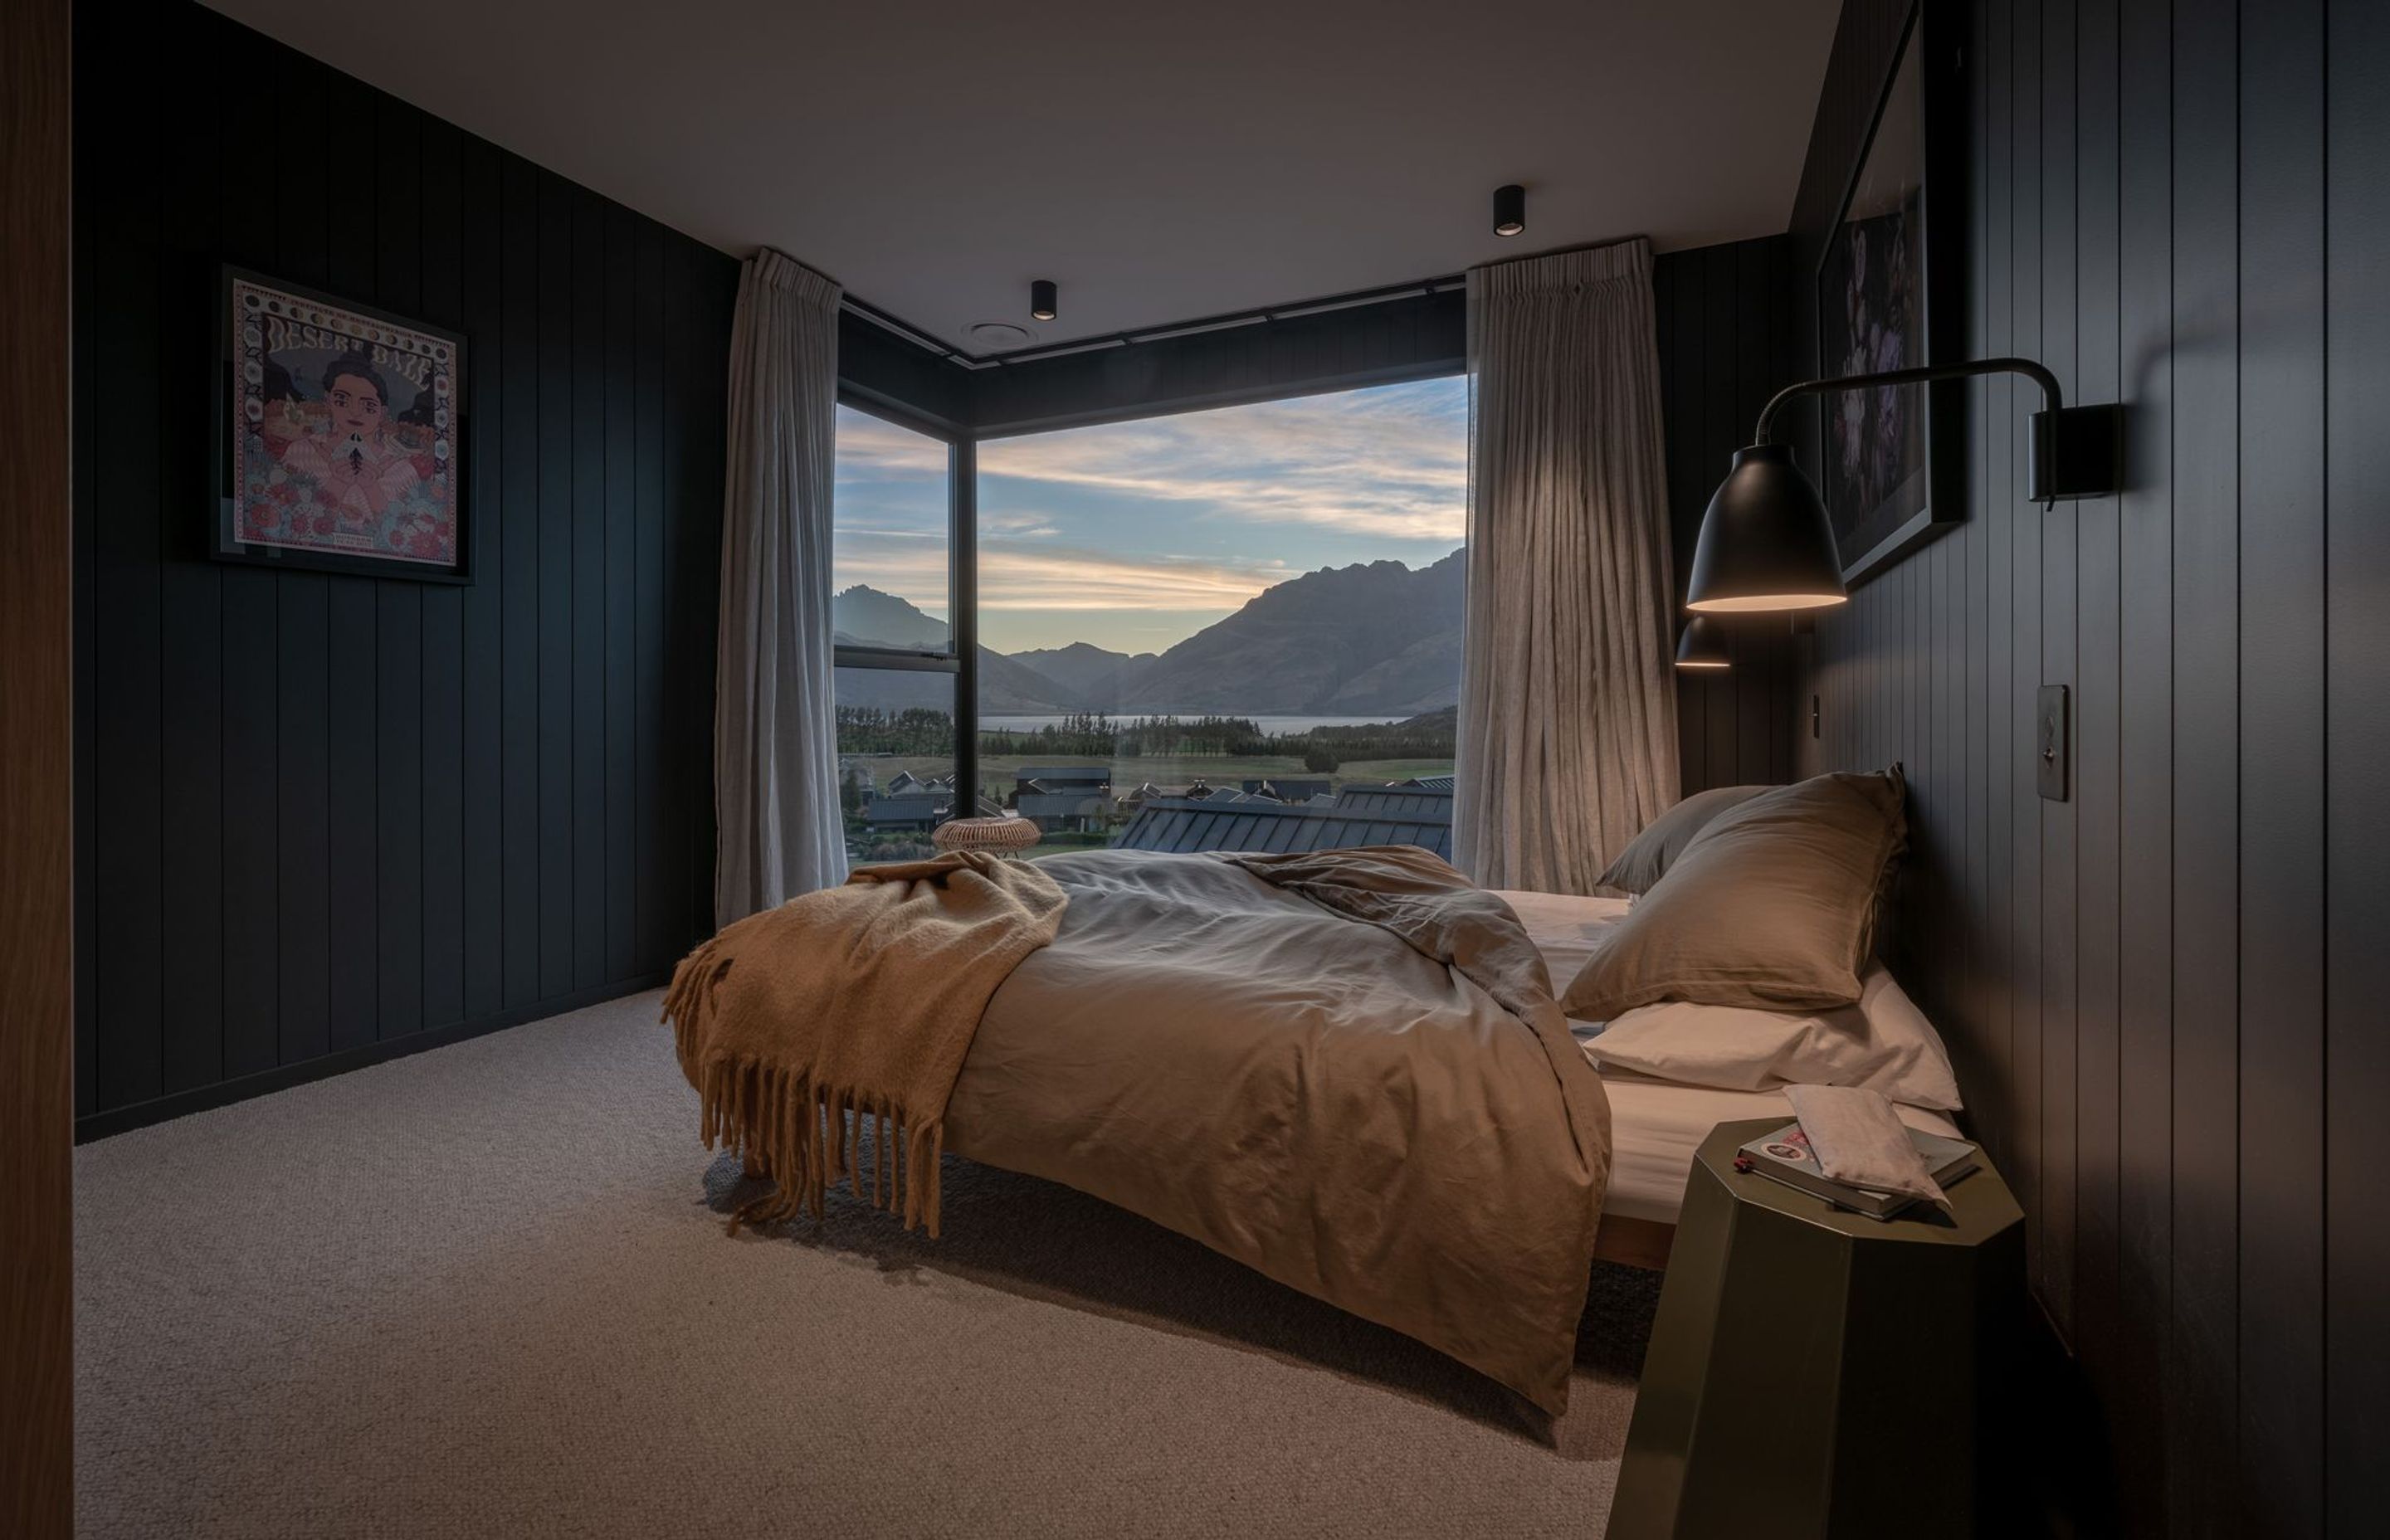 The master bedroom is compact in size, yet takes in a remarkable view.